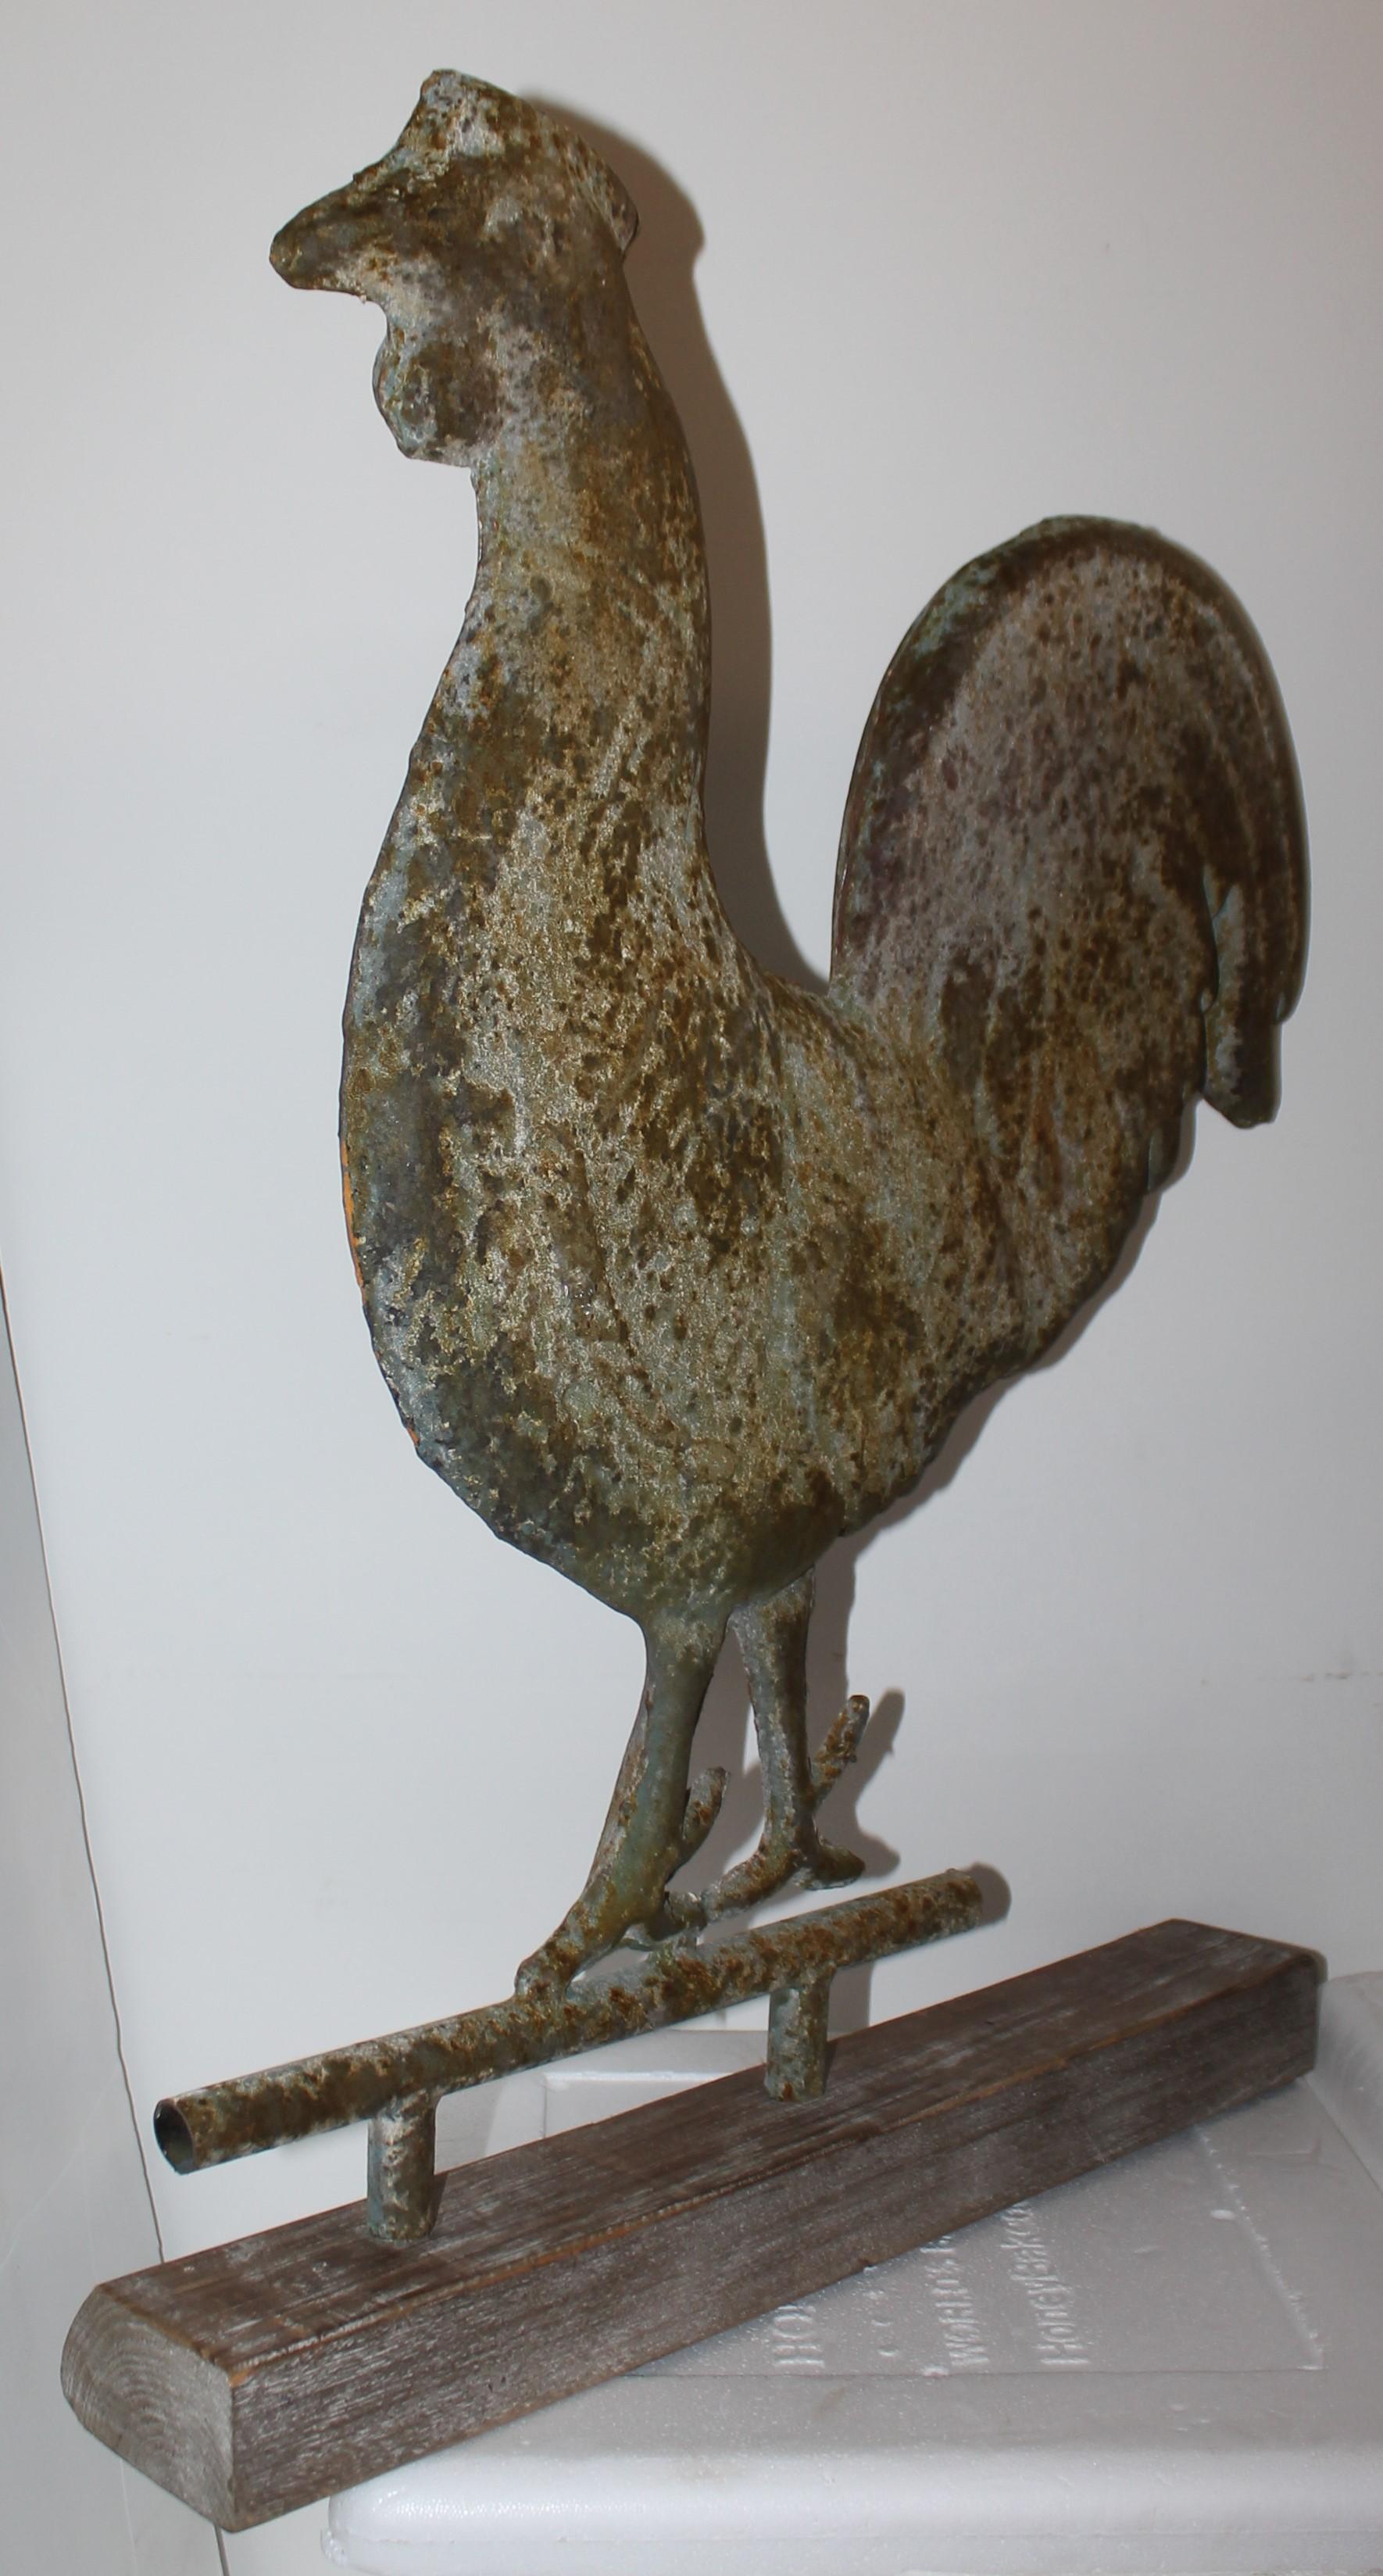 This amazing patinated rooster weather vane is in fantastic as found condition. Was found in New England and is in undisturbed surface. It is on a aged plank of wood as found from the folk art collection. It came from a fifty year old folk art and